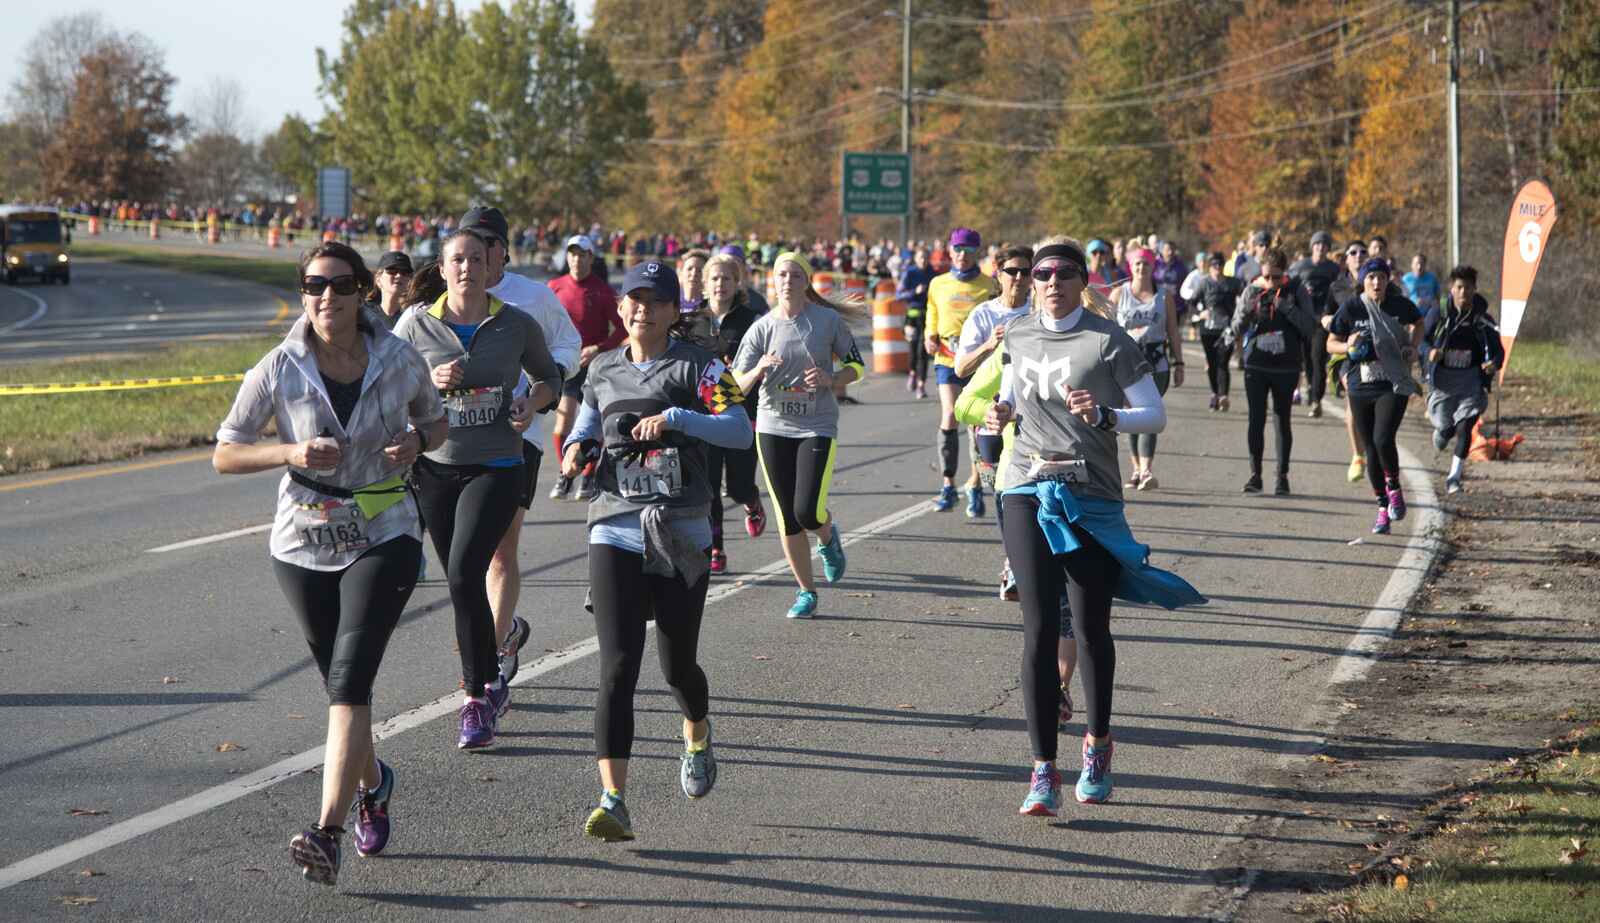 How Many Participants Ran In The 2017 Howard Christian Nature Center 5K Run?